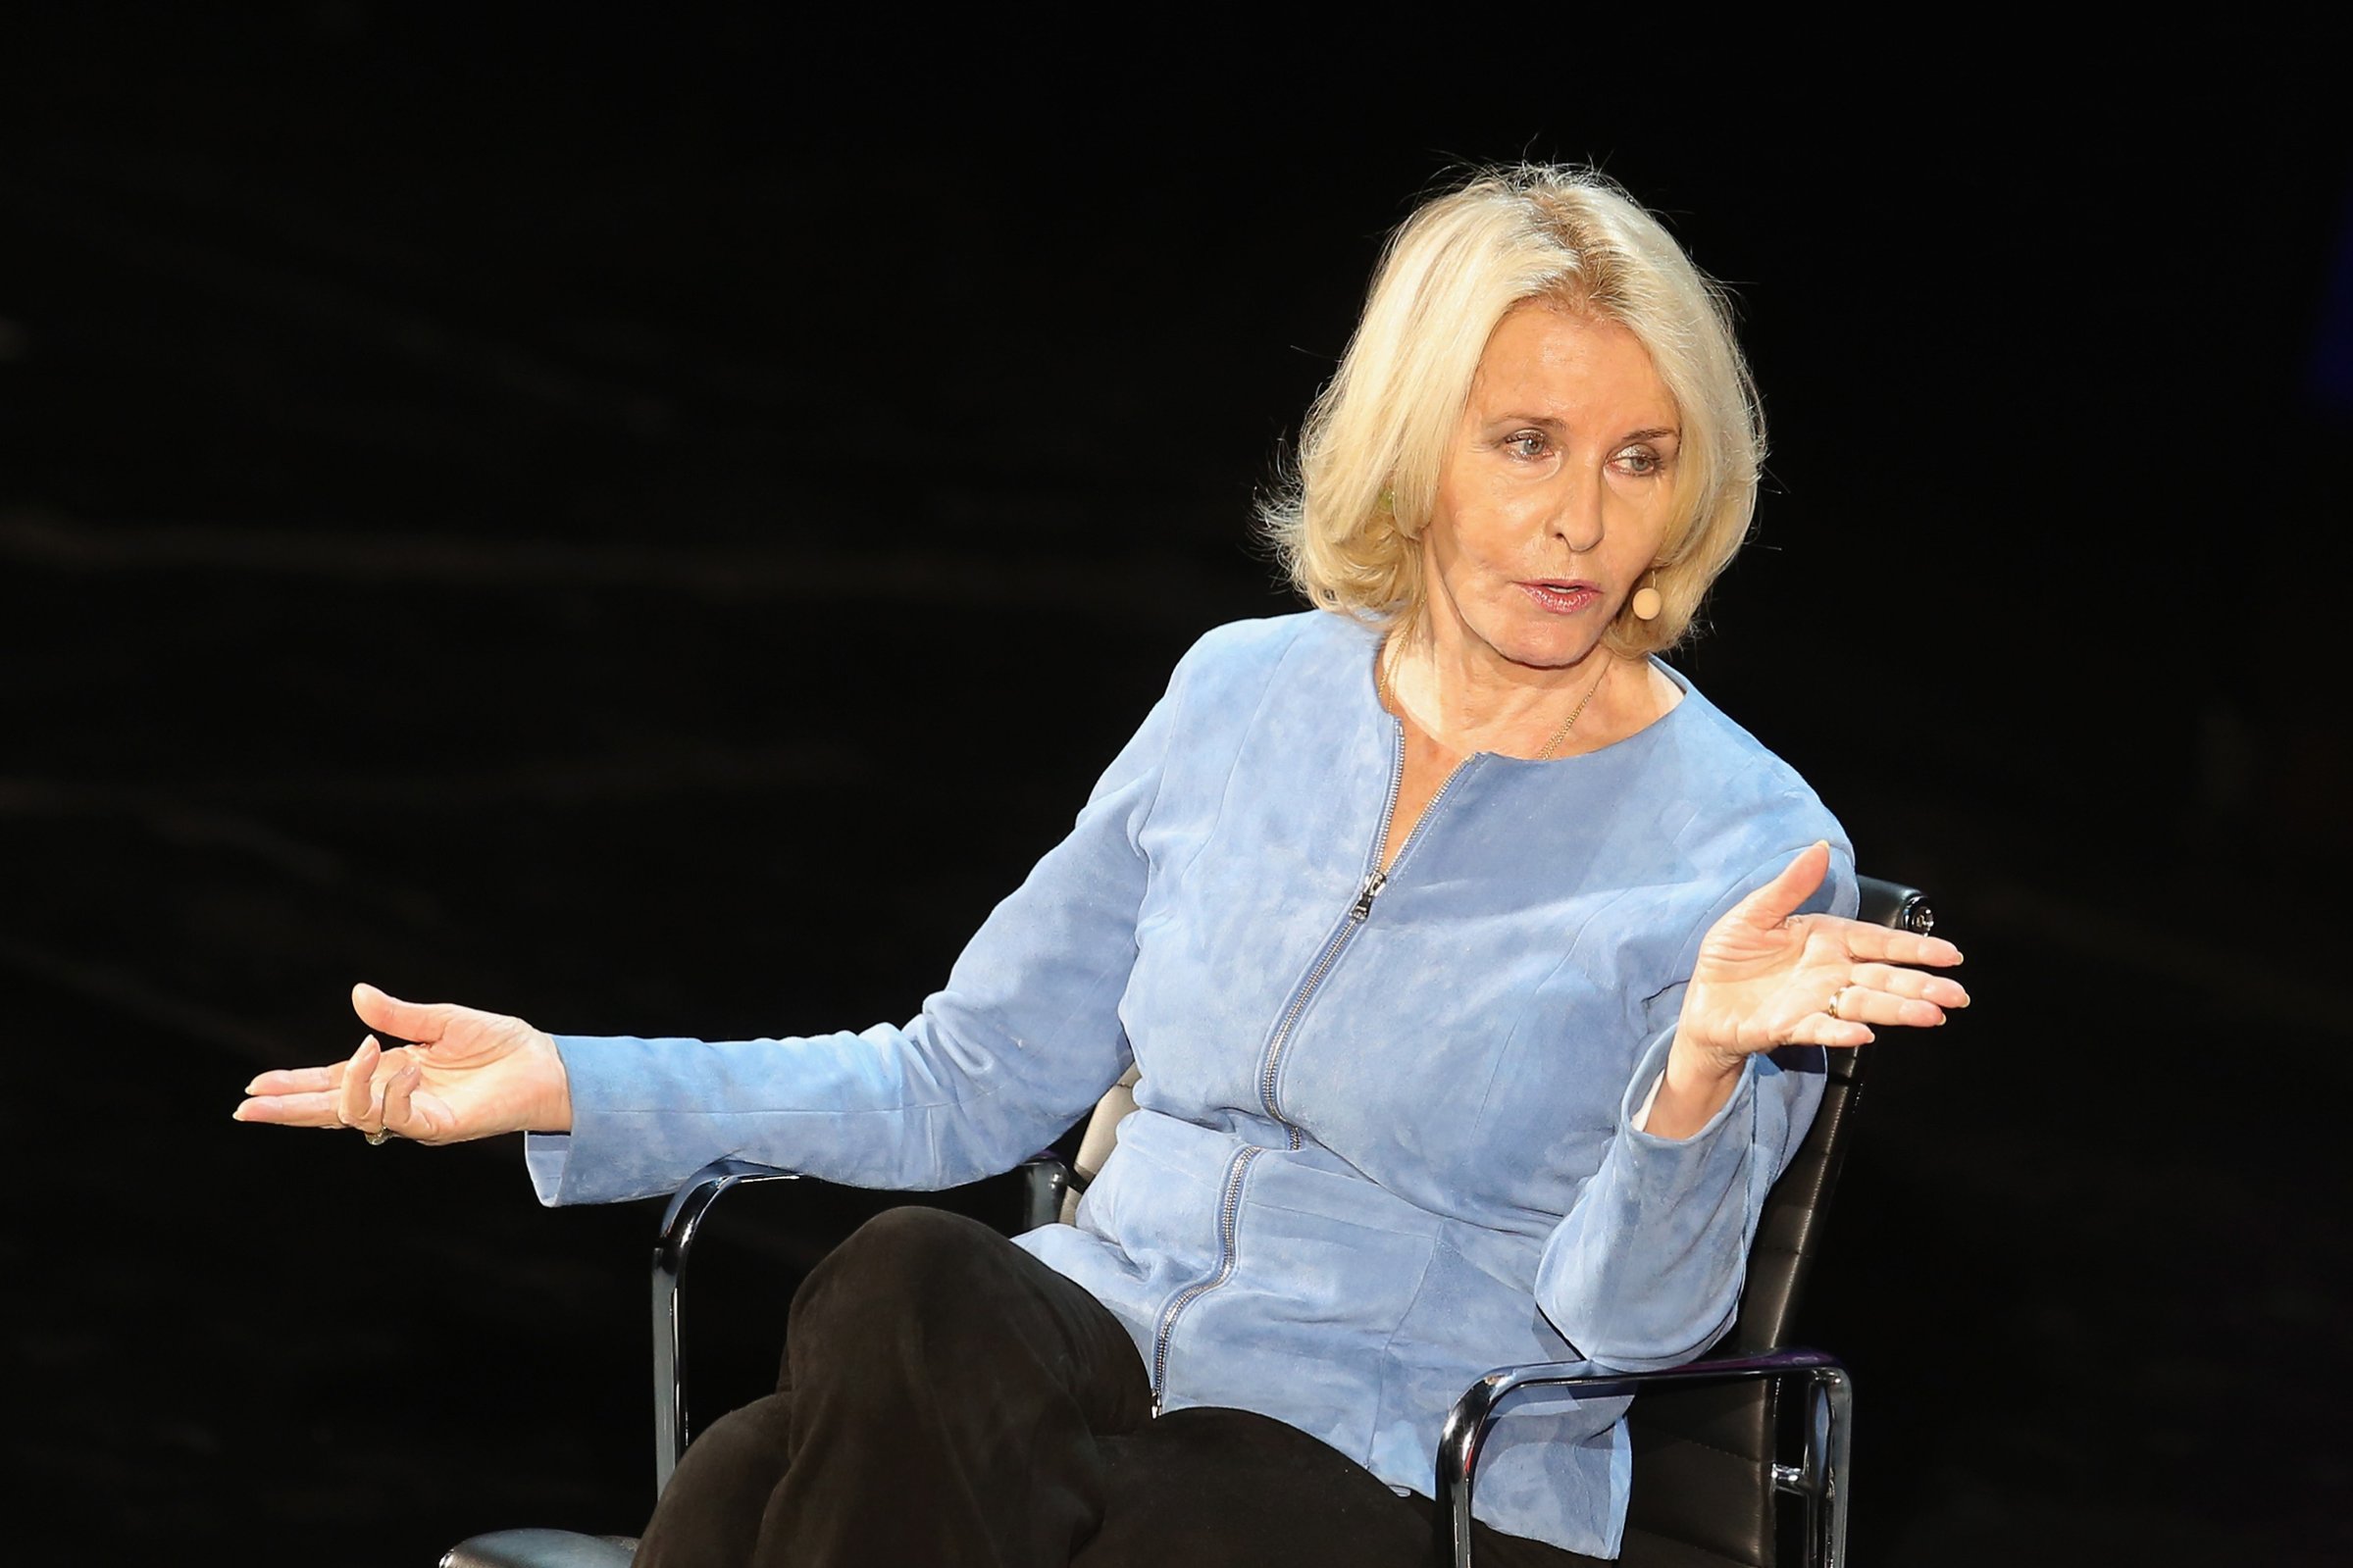 Sally Quinn speaks onstage at The Lasting Impact of Anita Hill during Tina Brown's 7th Annual Women in the World Summit at David H. Koch Theater at Lincoln Center on April 8, 2016 in New York City.